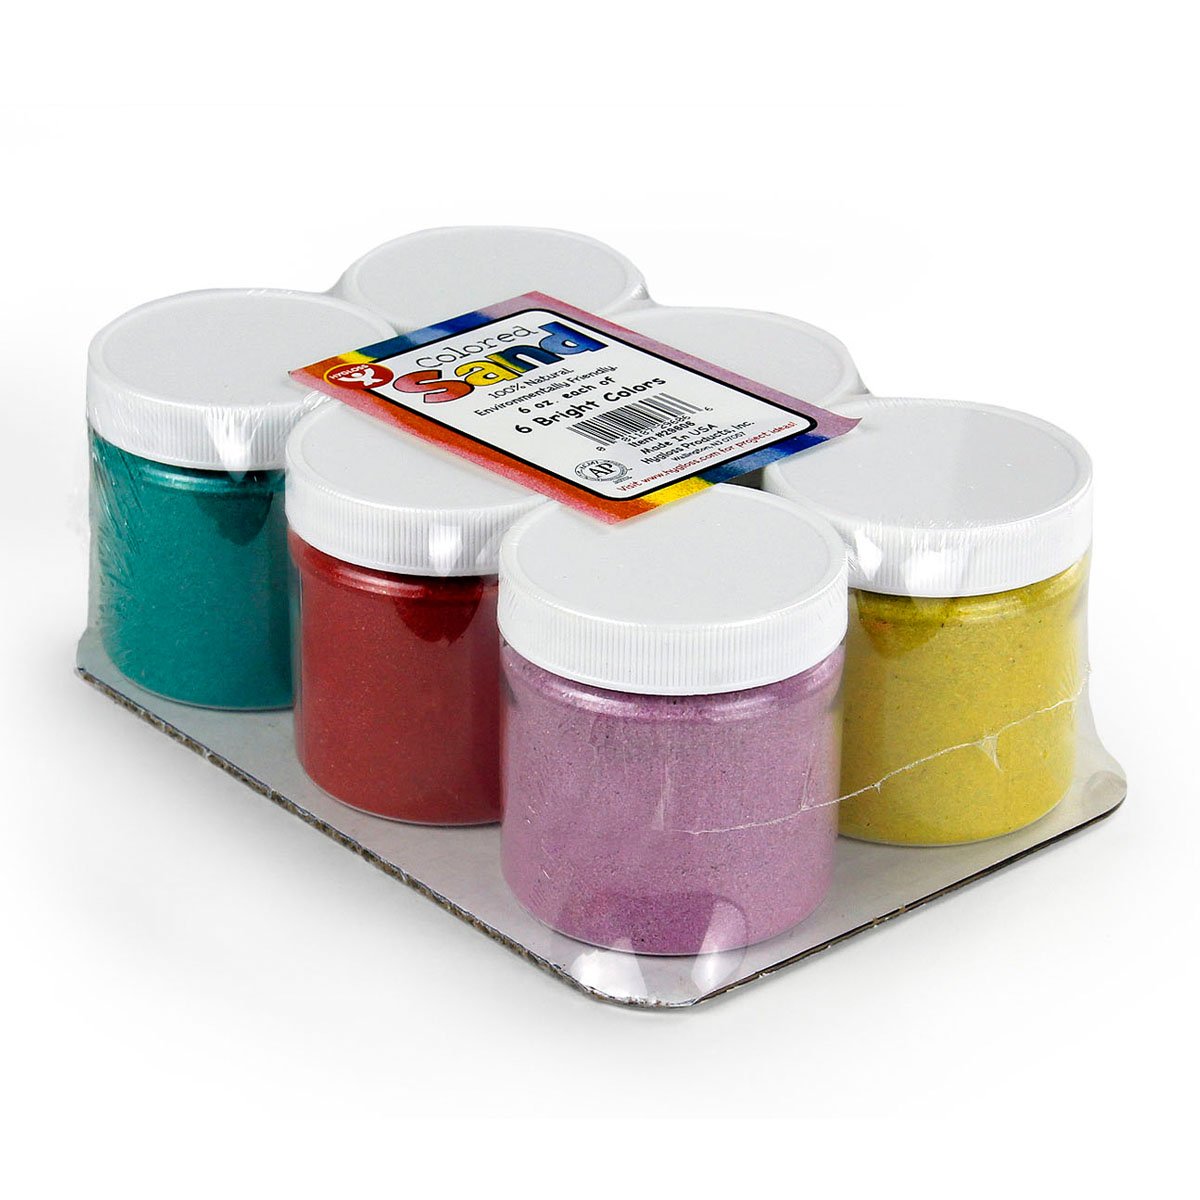 1 lb Green Assorted Colorful Craft Art Bucket O Sand Hygloss Products Colored Play Sand 